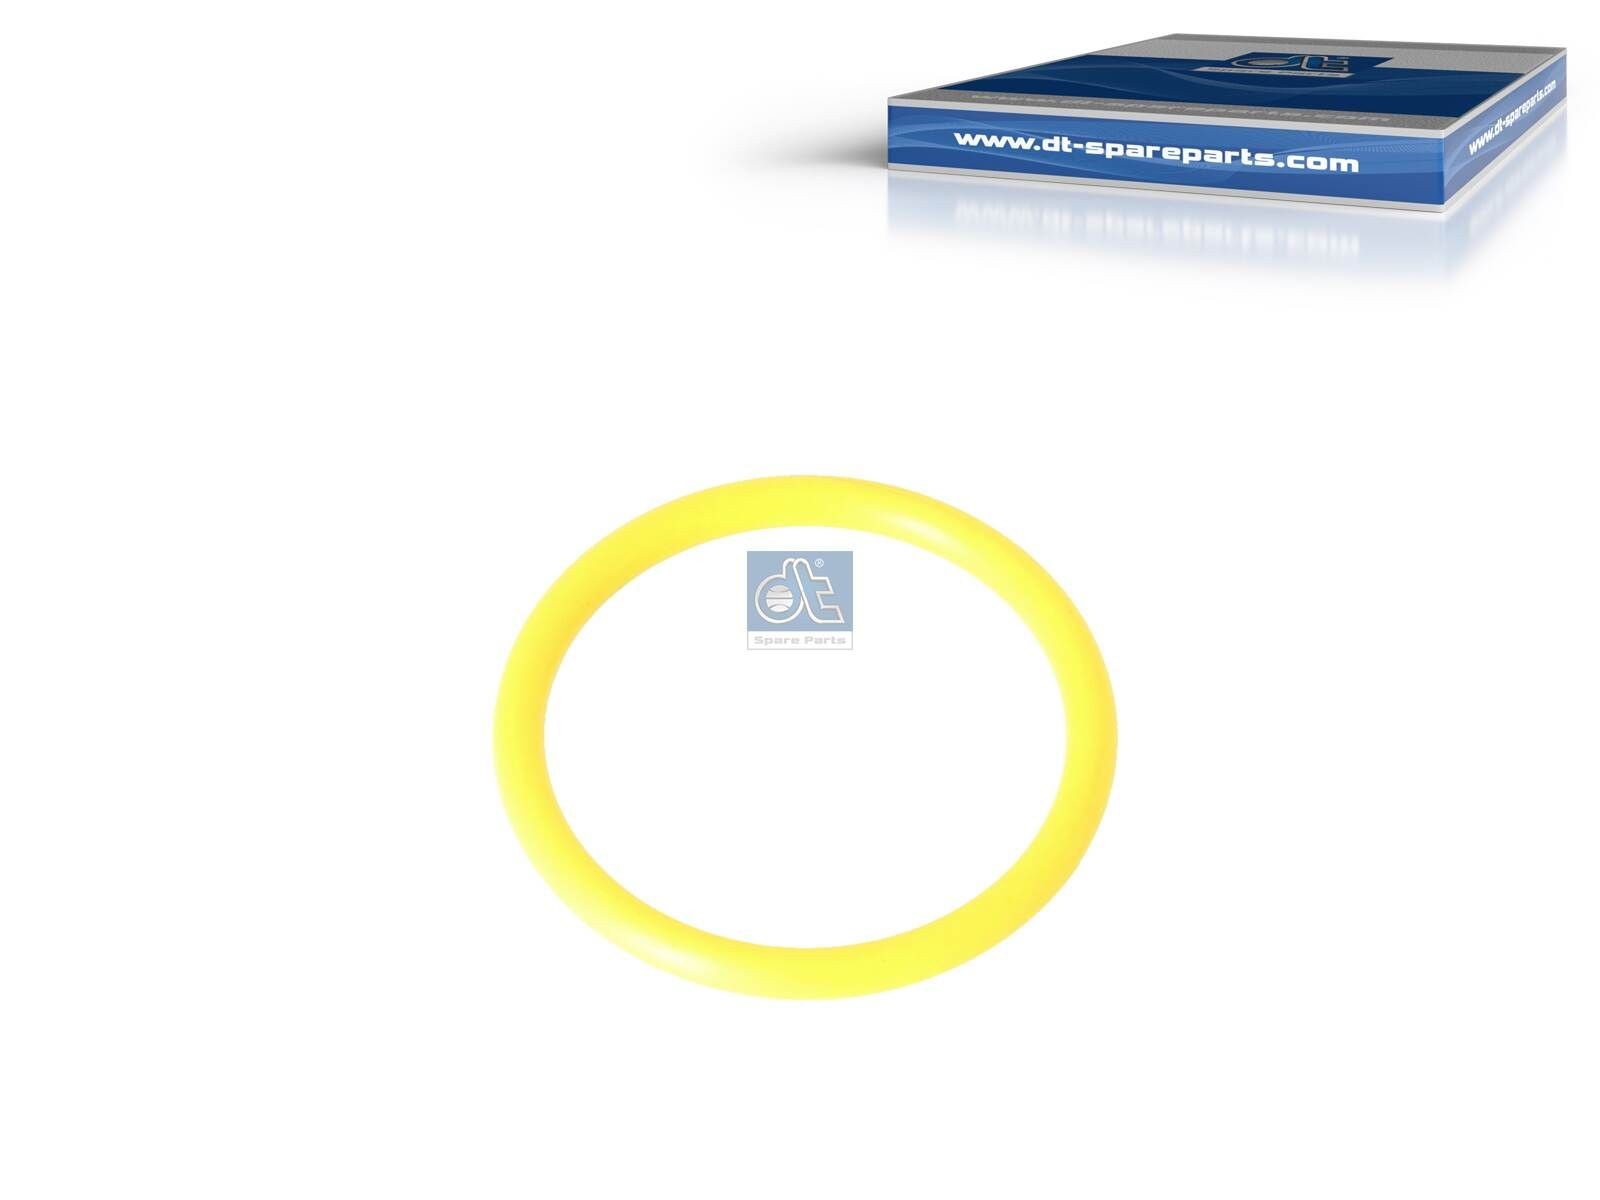 DT Spare Parts 17,2 x 1,8 mm, O-Ring, HNBR (hydrogenated nitrile butadiene rubber) Seal Ring 1.27422 buy